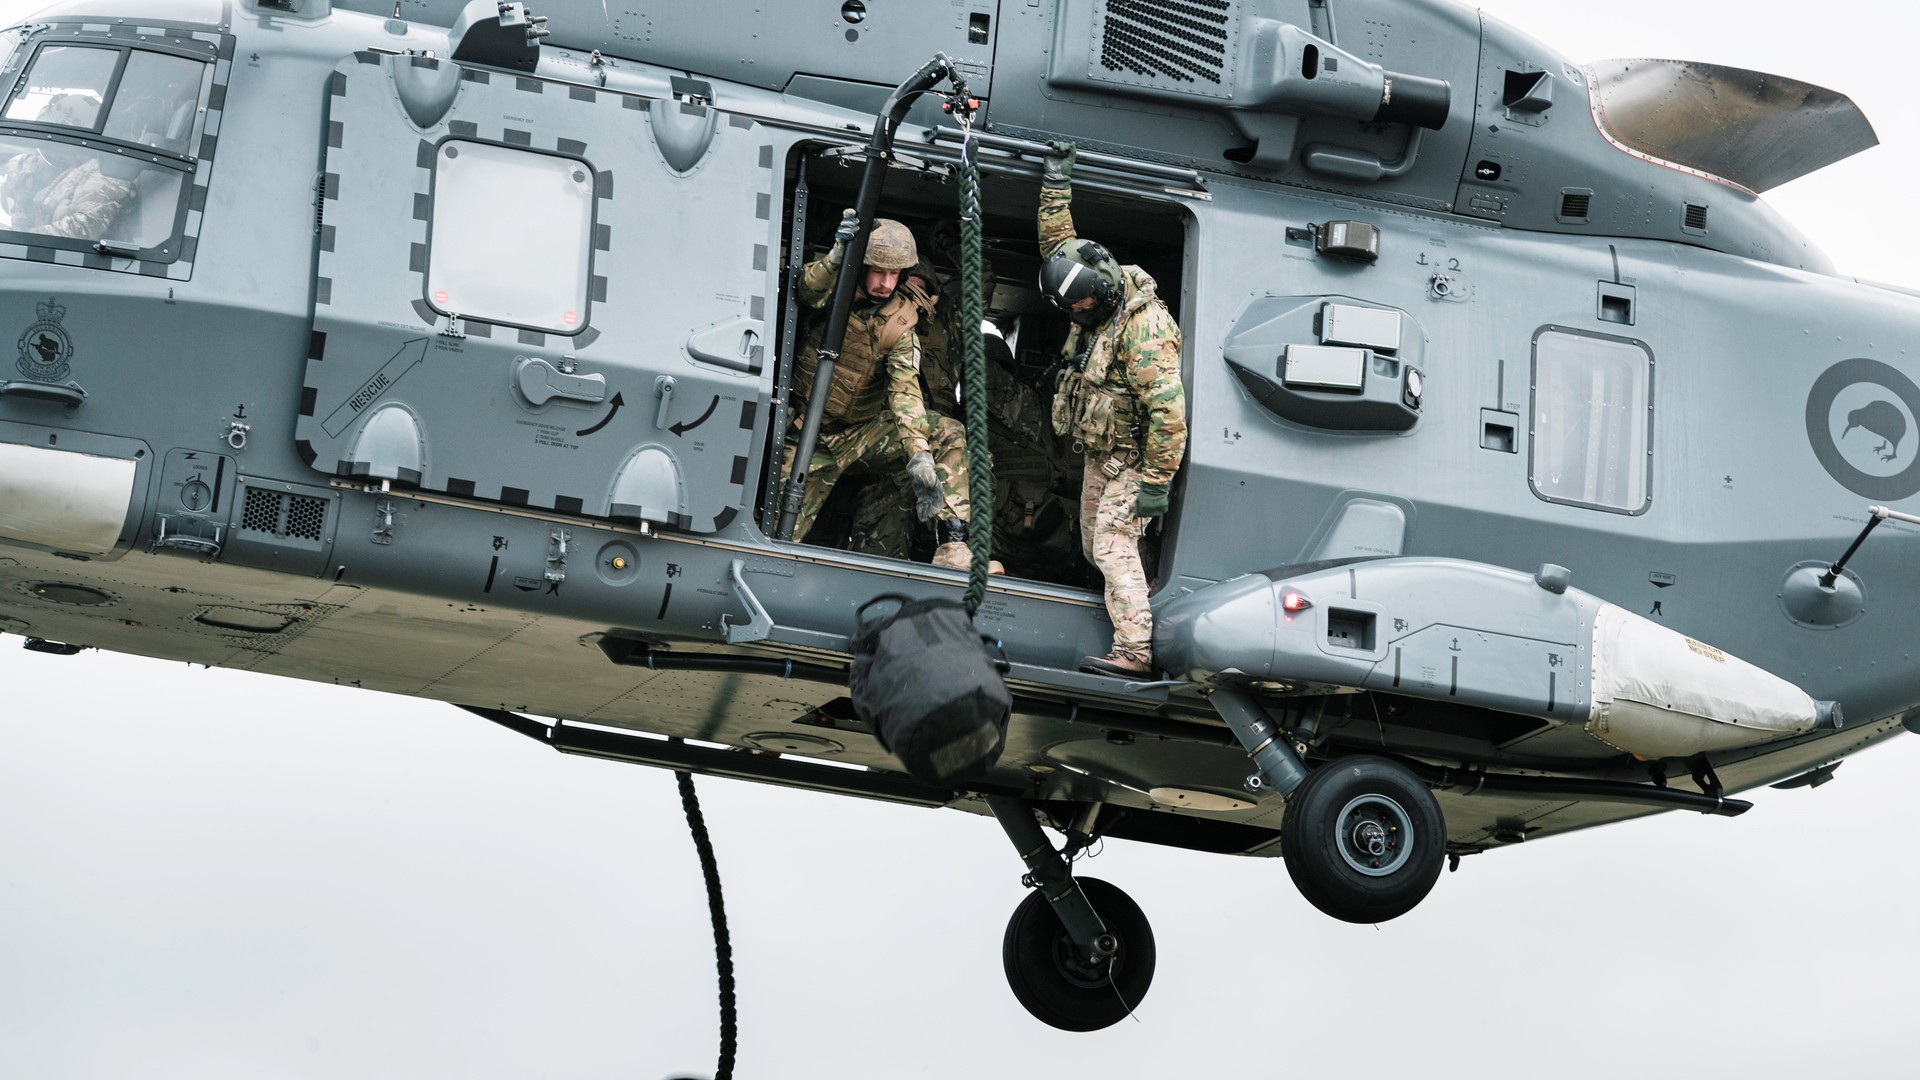 NZ Army soldiers take to the skies in daredevil rope jumps from NH90 helicopters